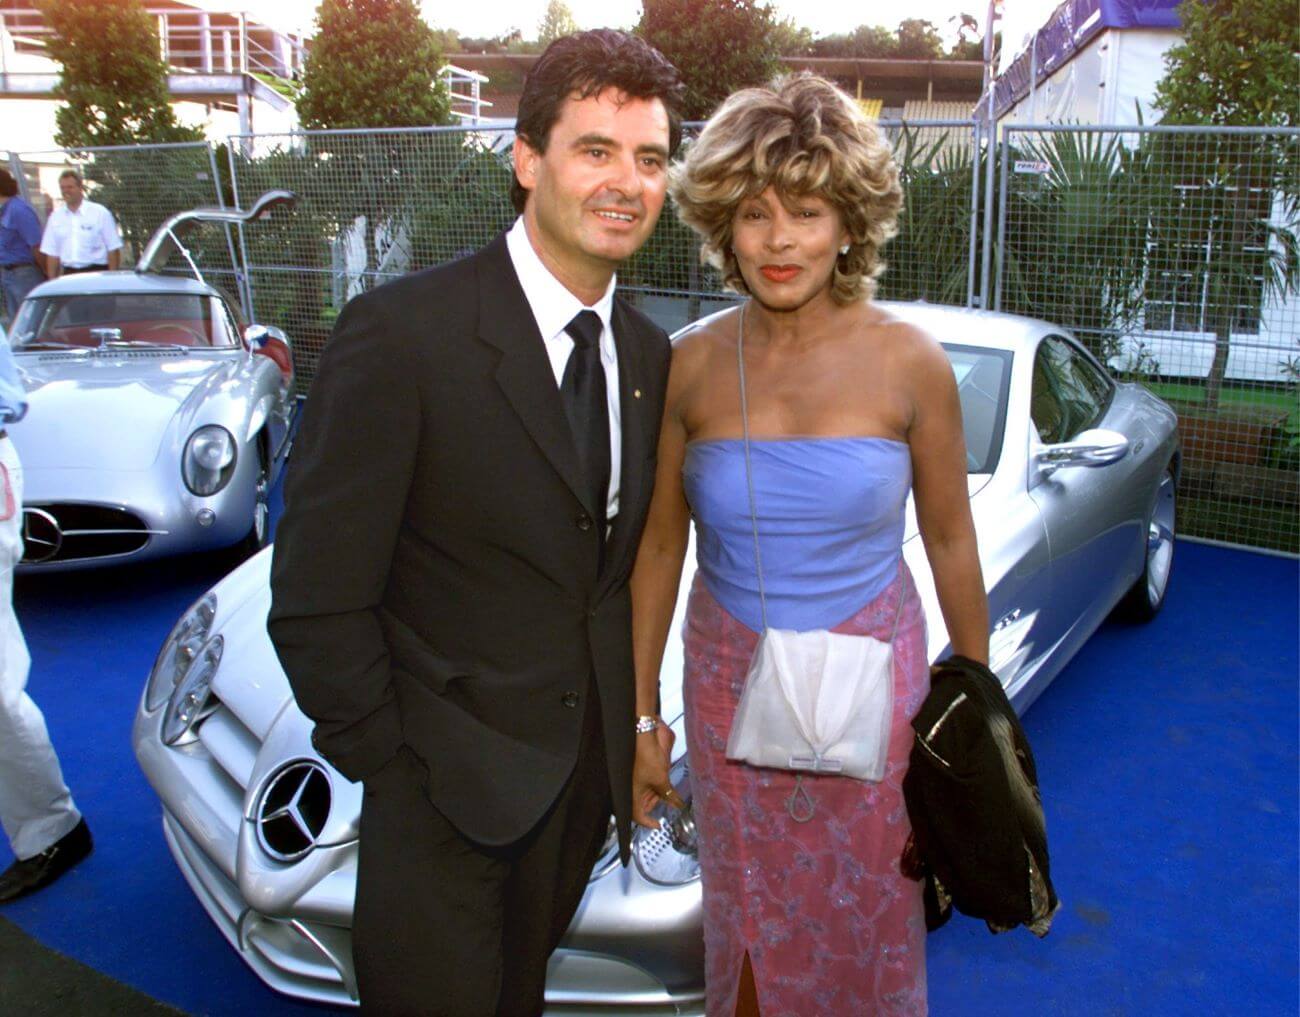 Erwin Bach and Tina Turner stand in front of a silver car.